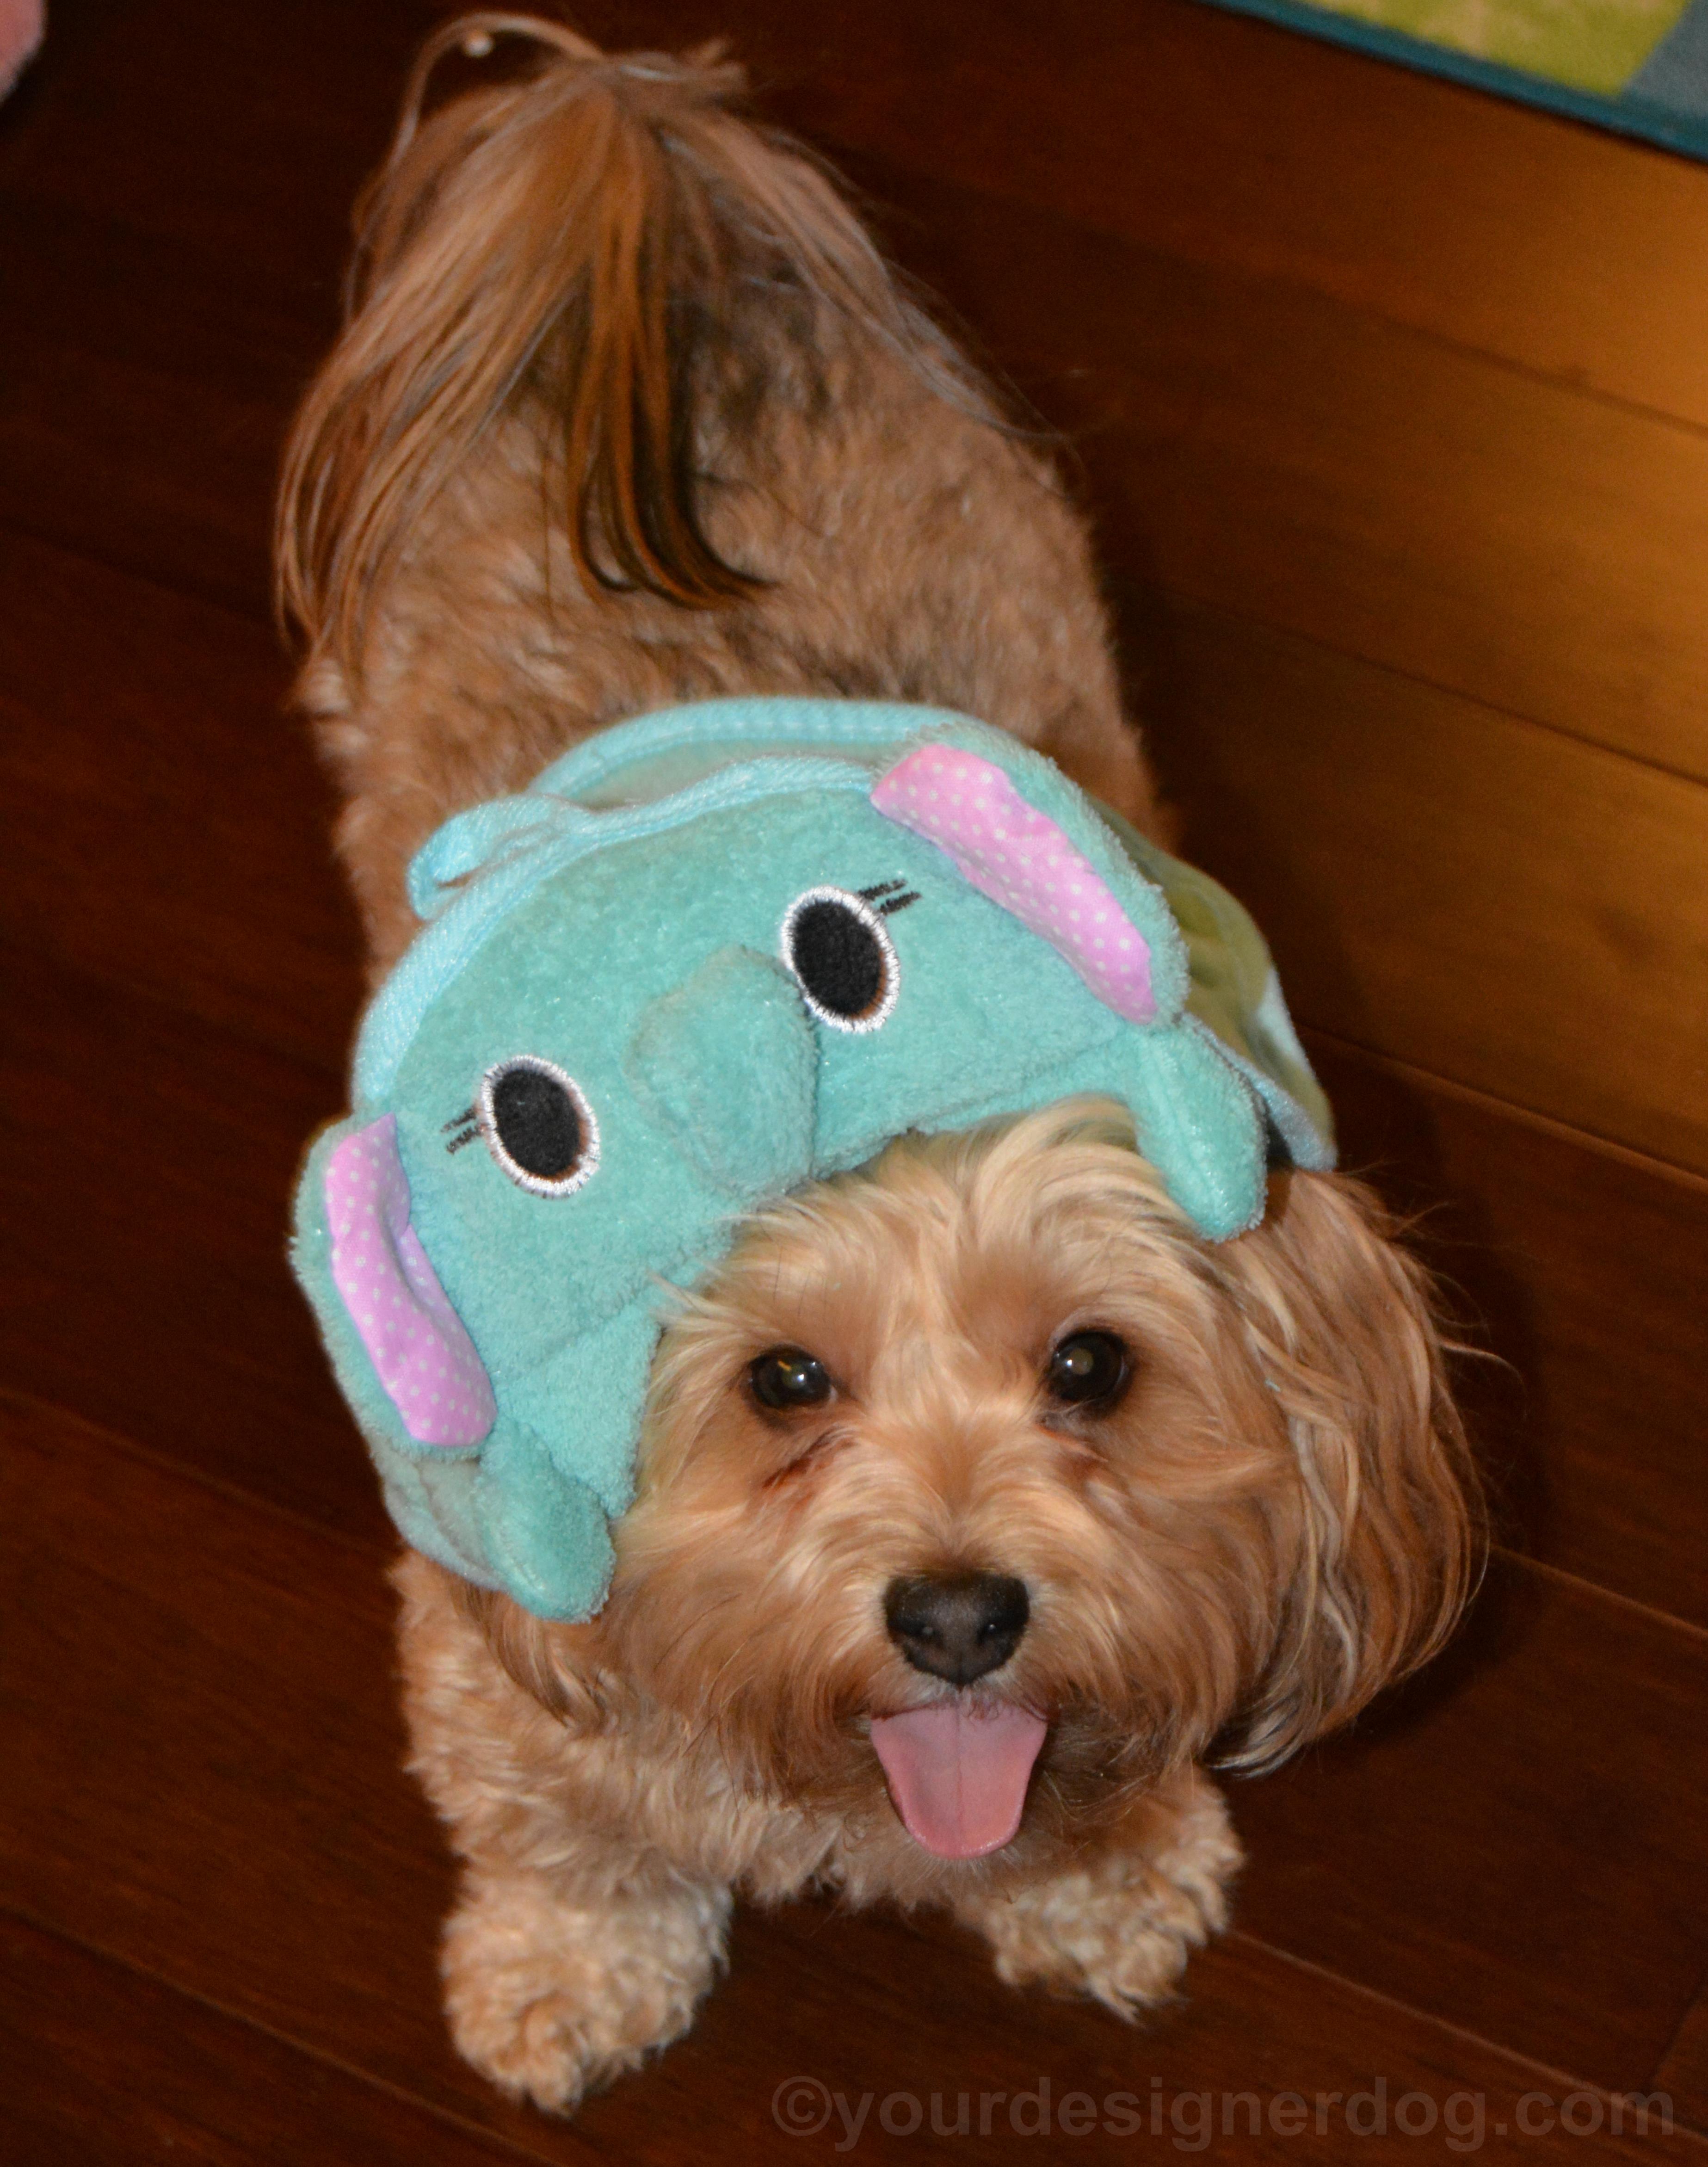 dogs, designer dogs, Yorkipoo, yorkie poo, tongue out, silly puppy, elephant towel